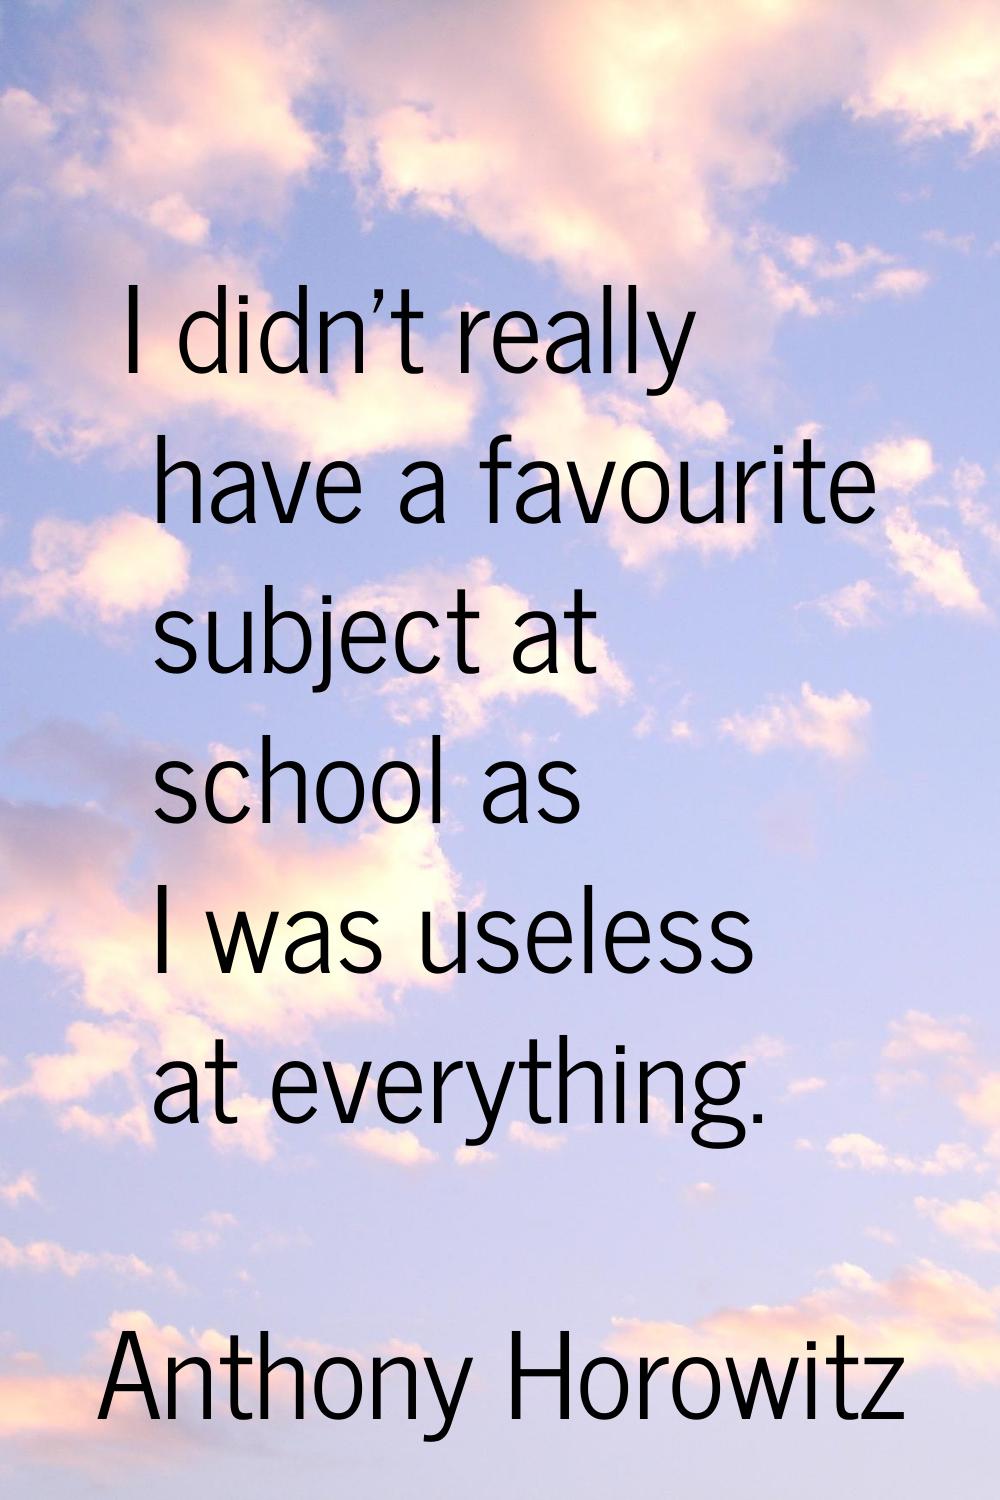 I didn't really have a favourite subject at school as I was useless at everything.